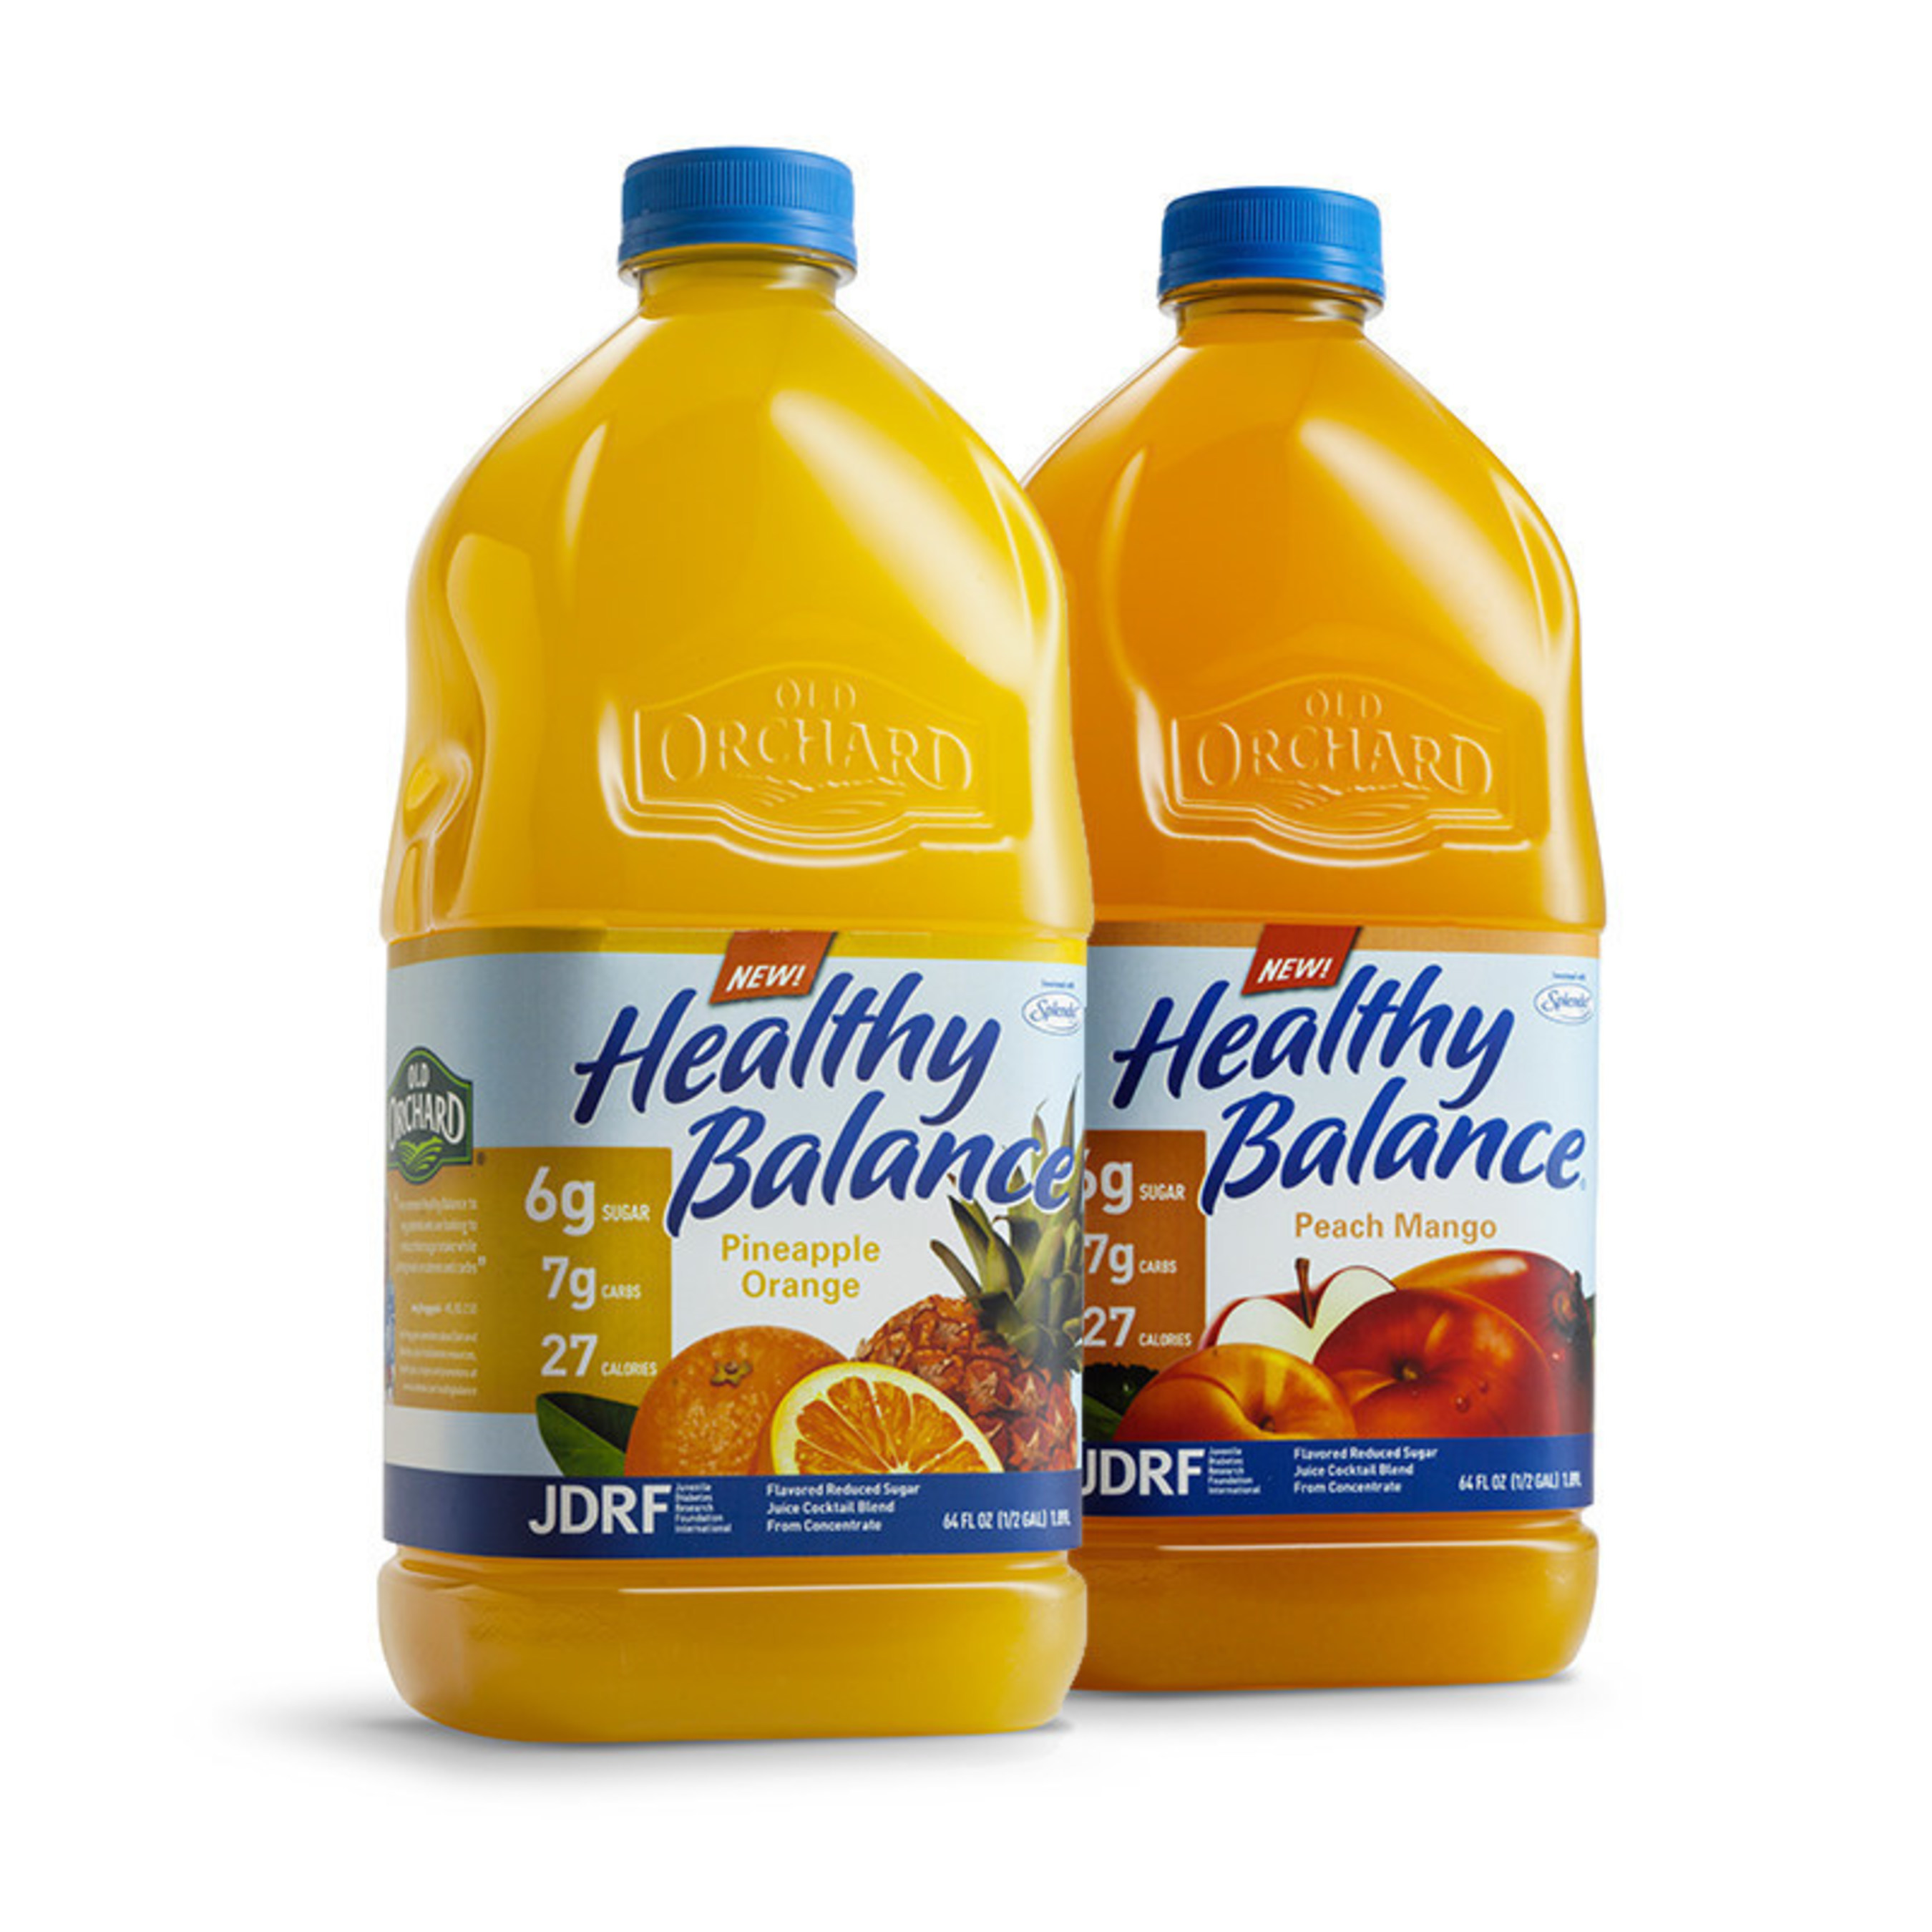 Old Orchard Brands introduces new tropically-inspired varieties to Healthy Balance line